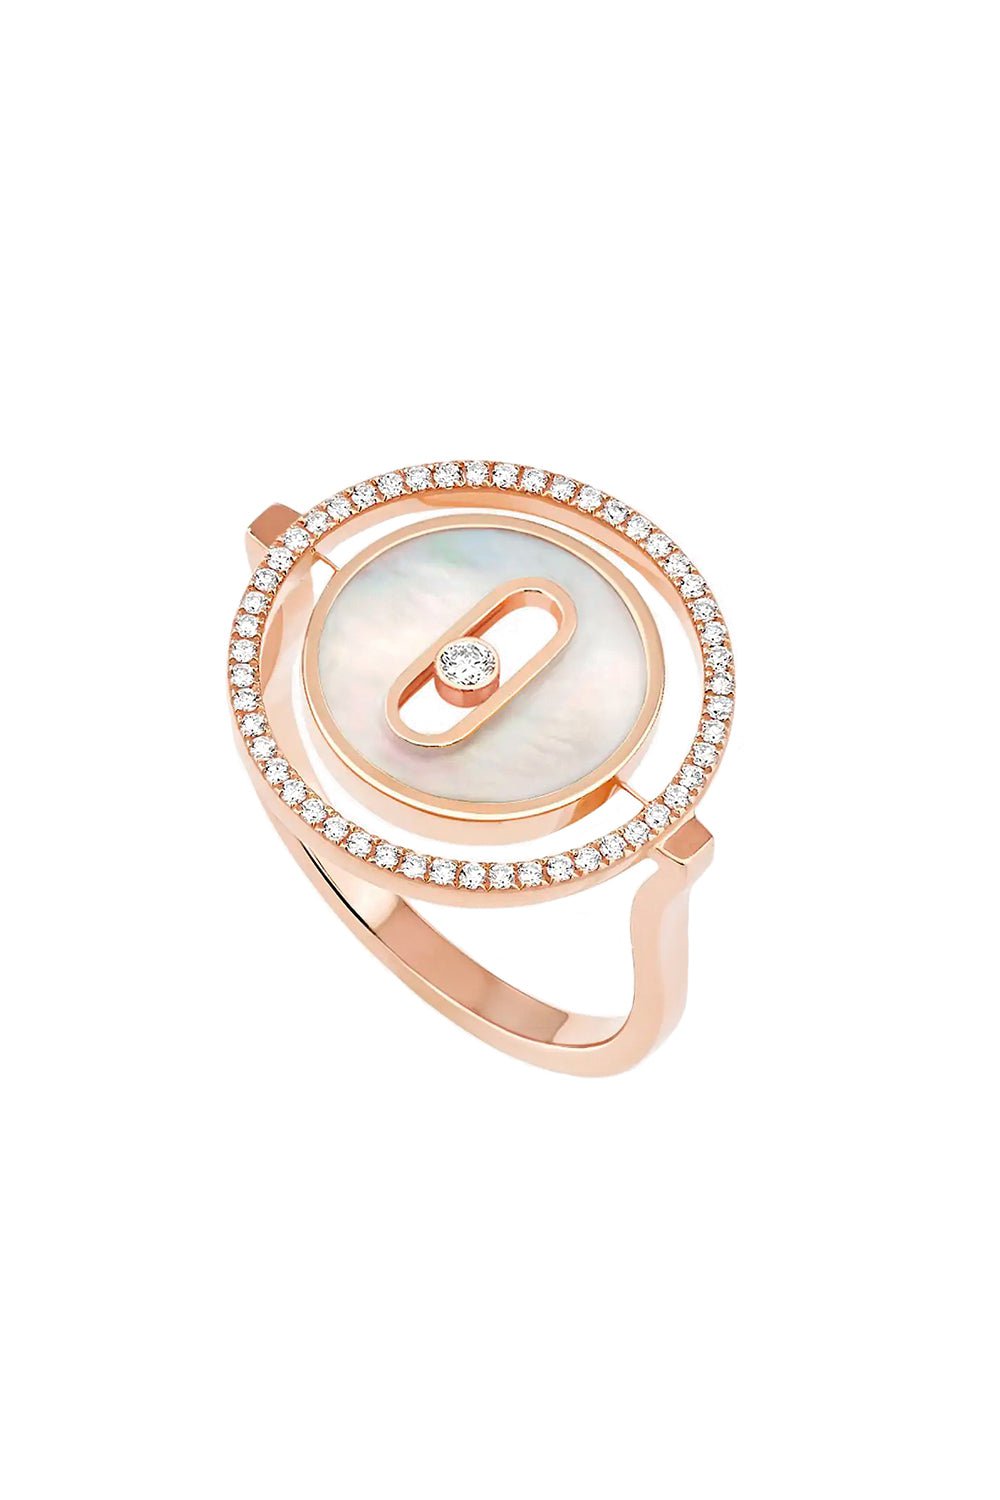 MESSIKA-Lucky Move Small White Mother Of Pearl Ring-ROSE GOLD